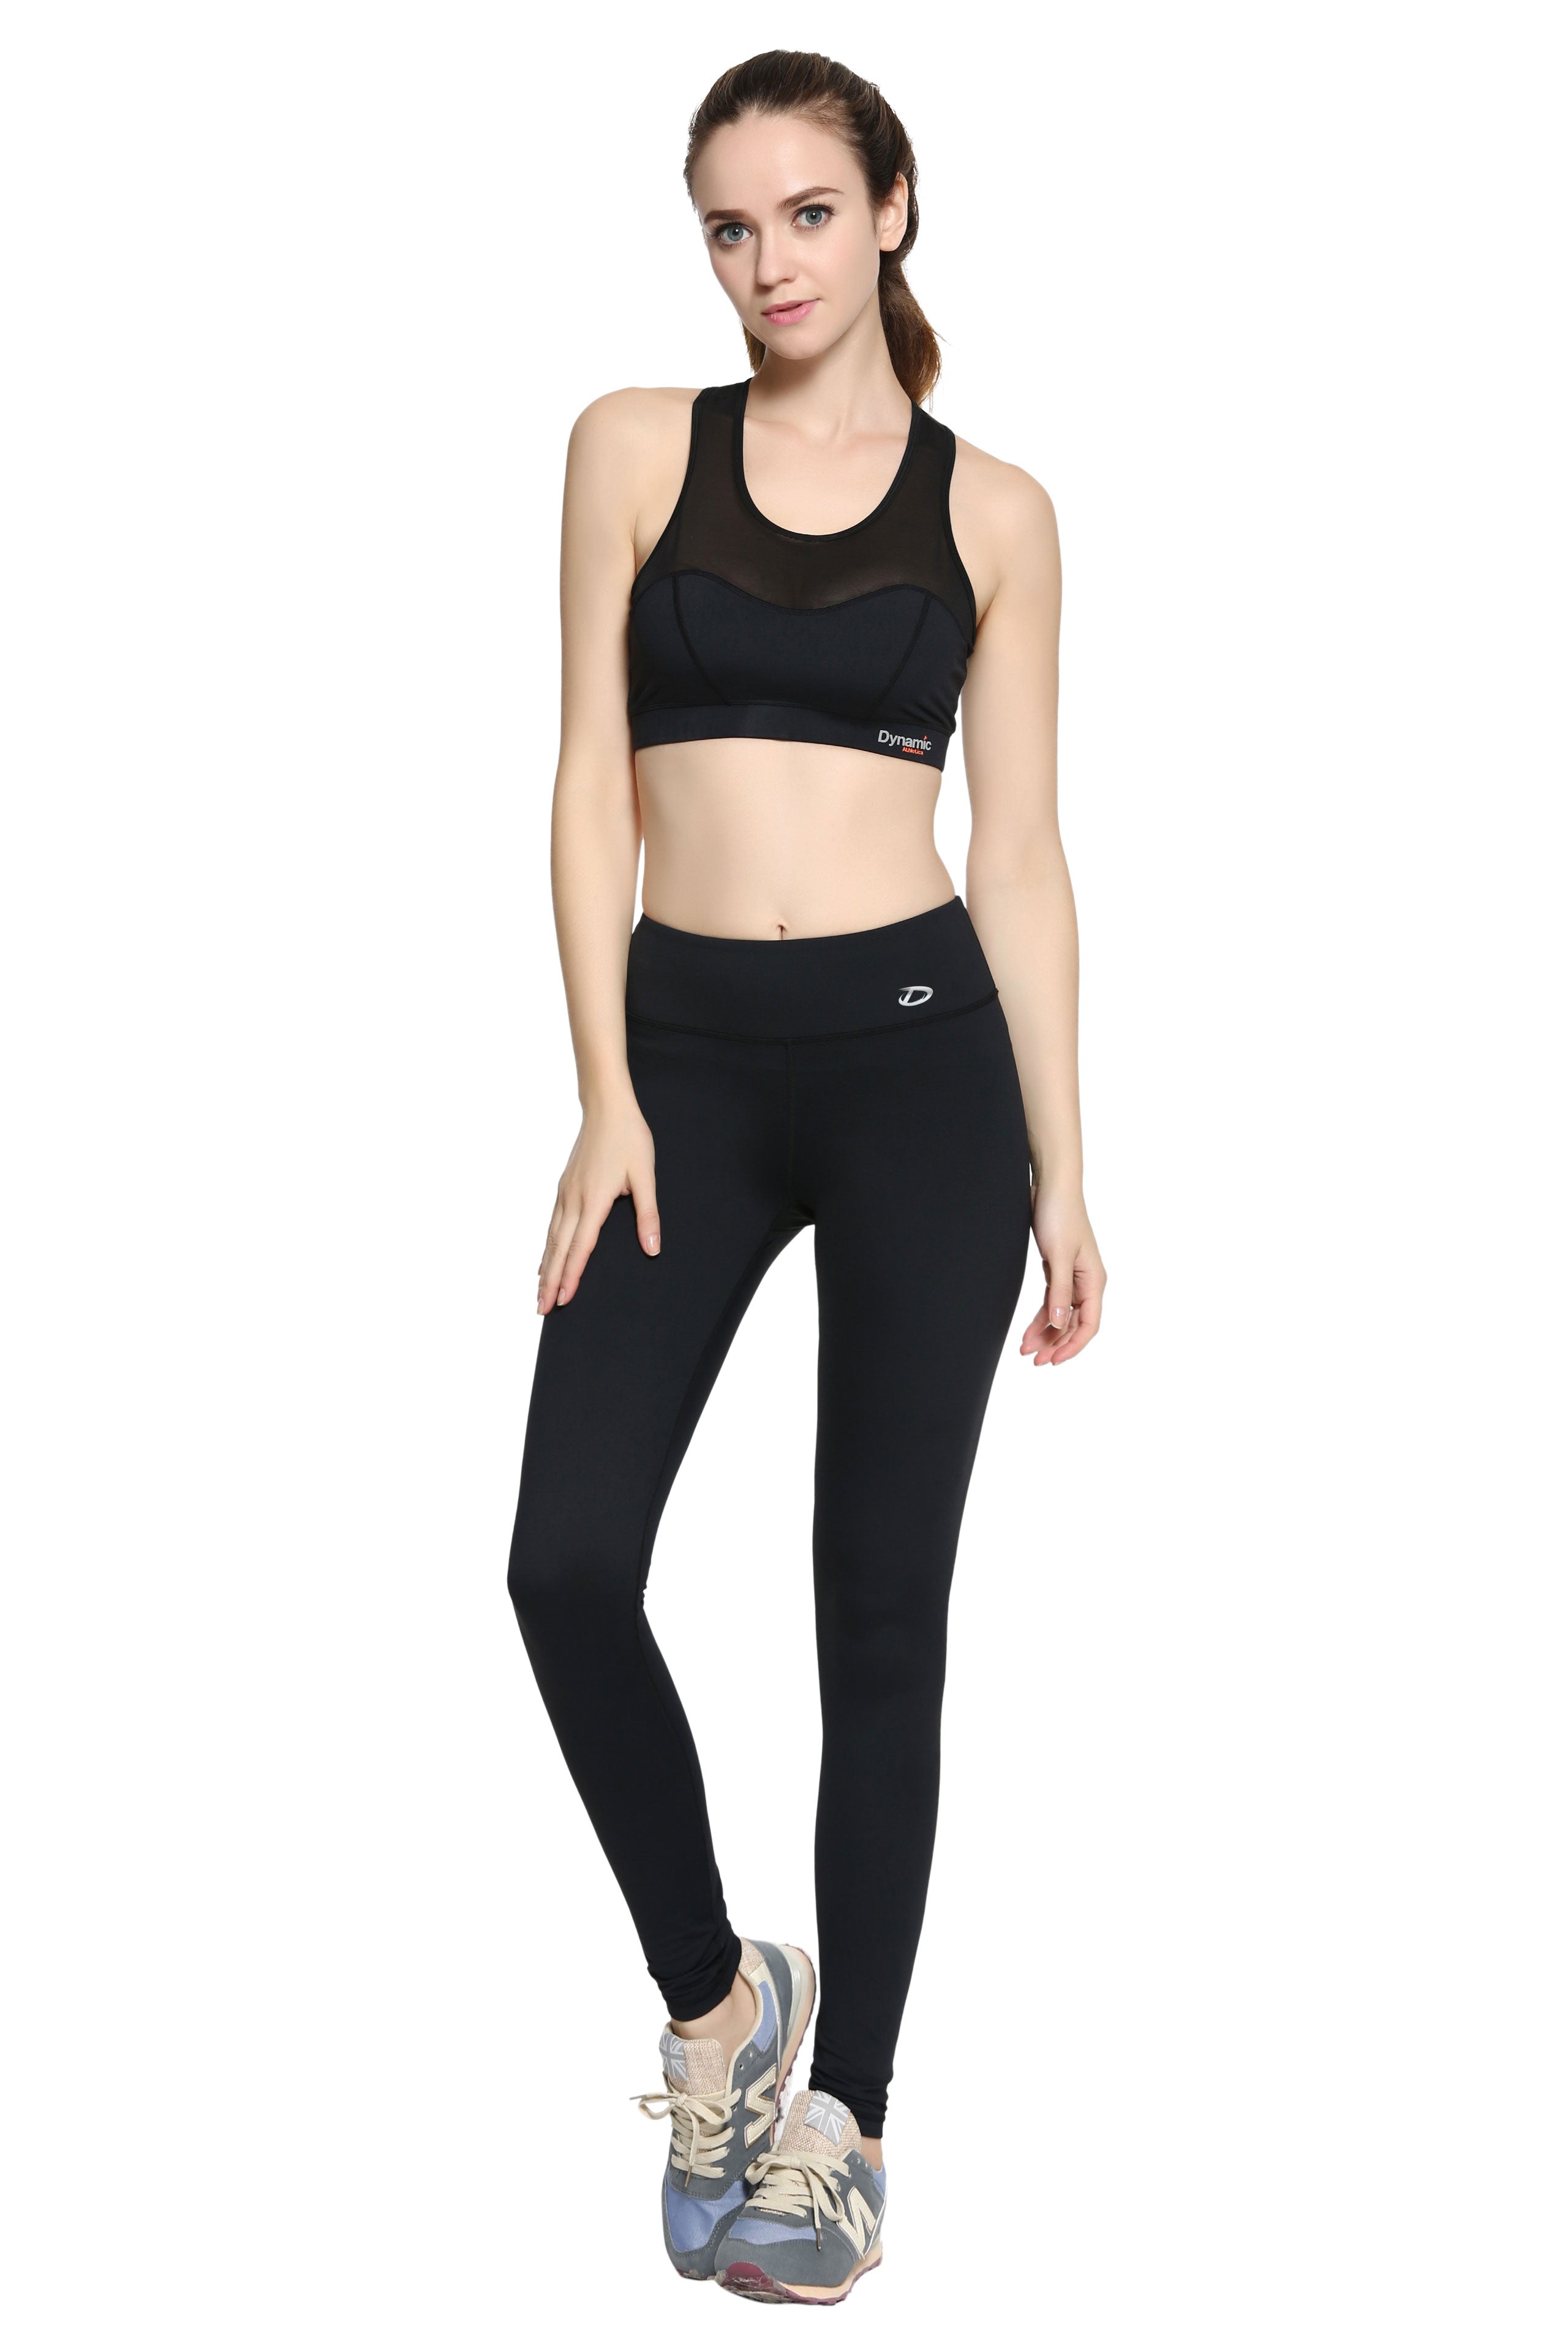 Active Research Women's Compression Pants - Athletic Tights